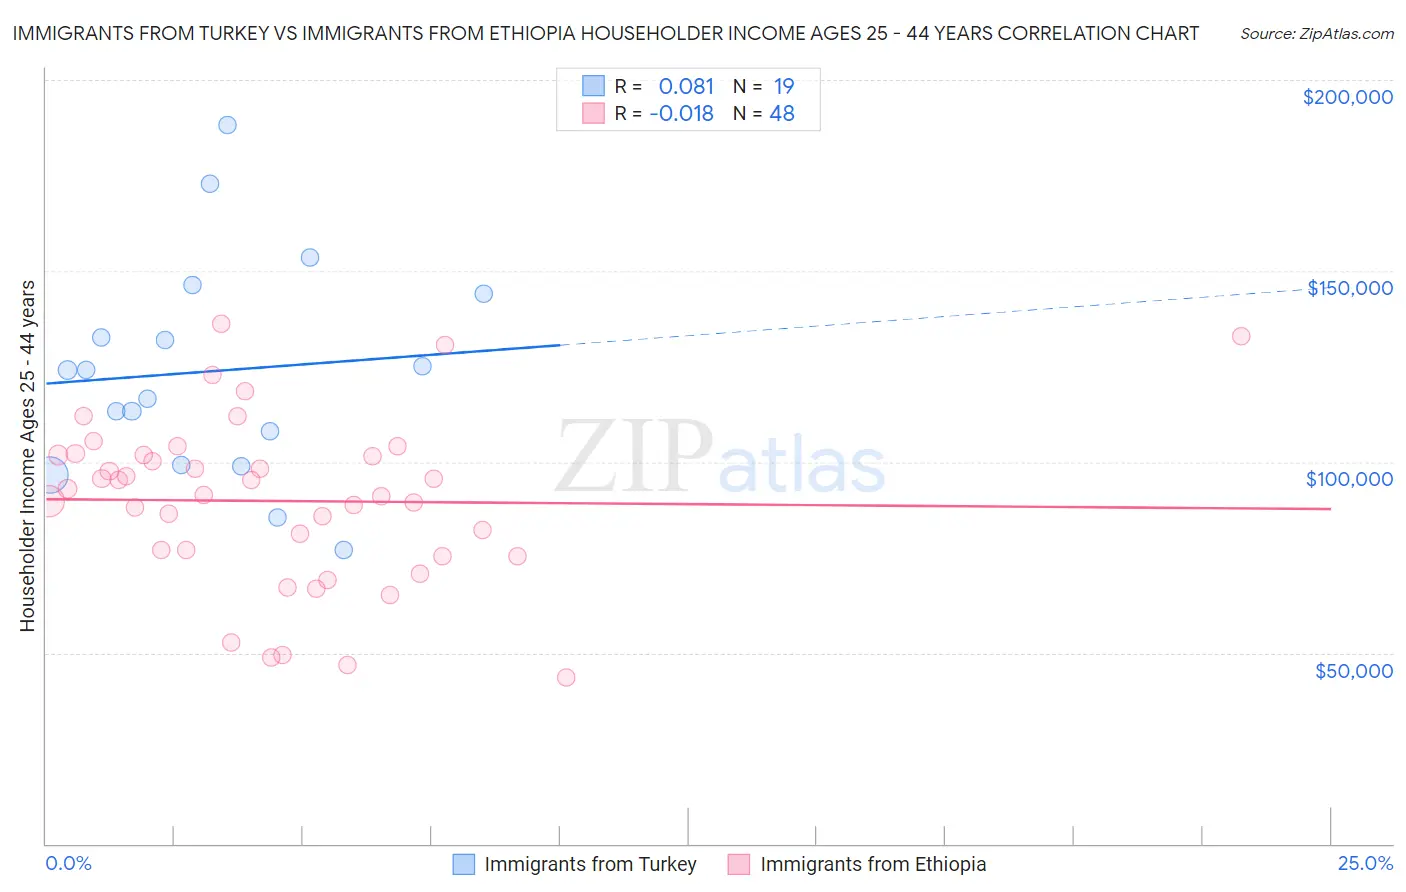 Immigrants from Turkey vs Immigrants from Ethiopia Householder Income Ages 25 - 44 years